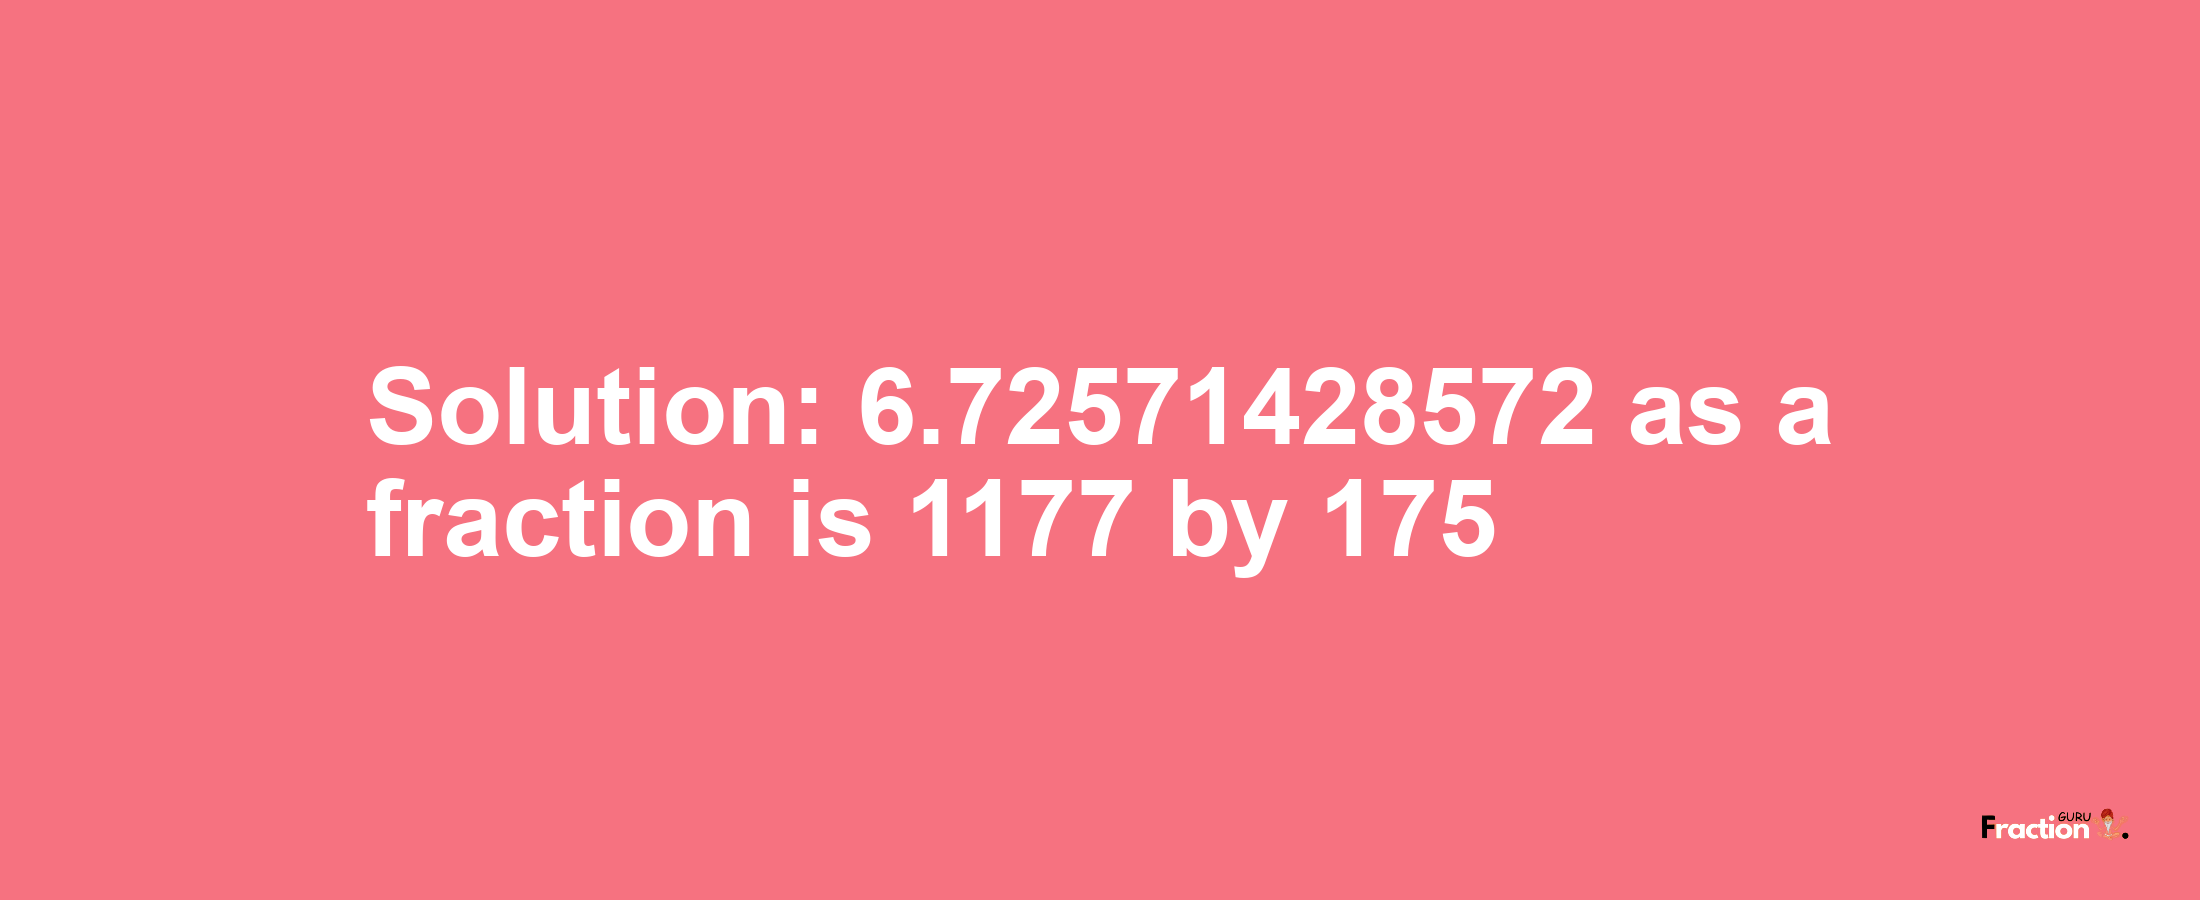 Solution:6.72571428572 as a fraction is 1177/175